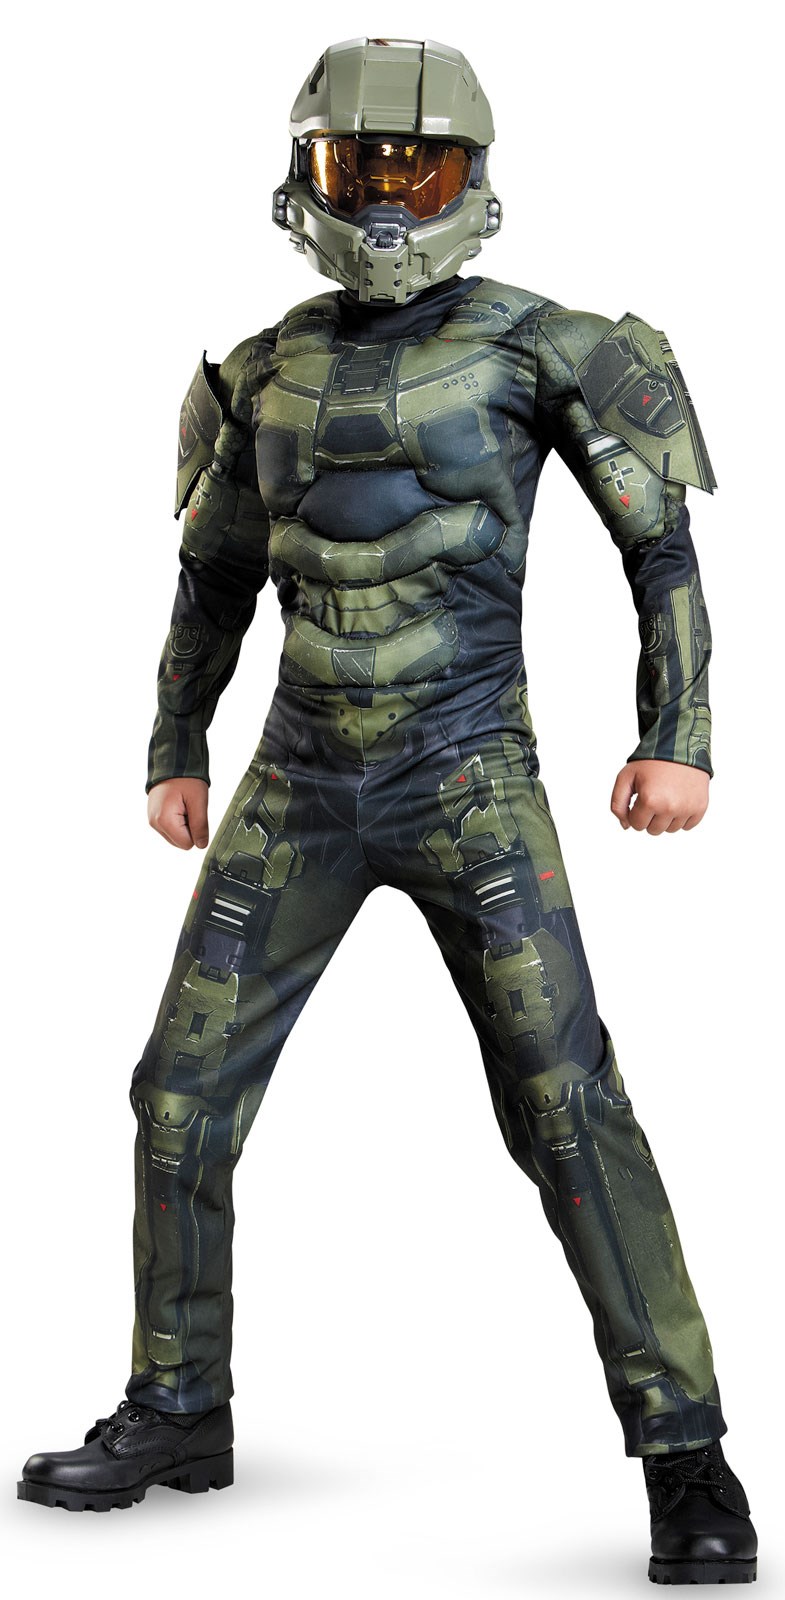 halo-master-chief-muscle-costume-for-kids-bc-808956.jpg